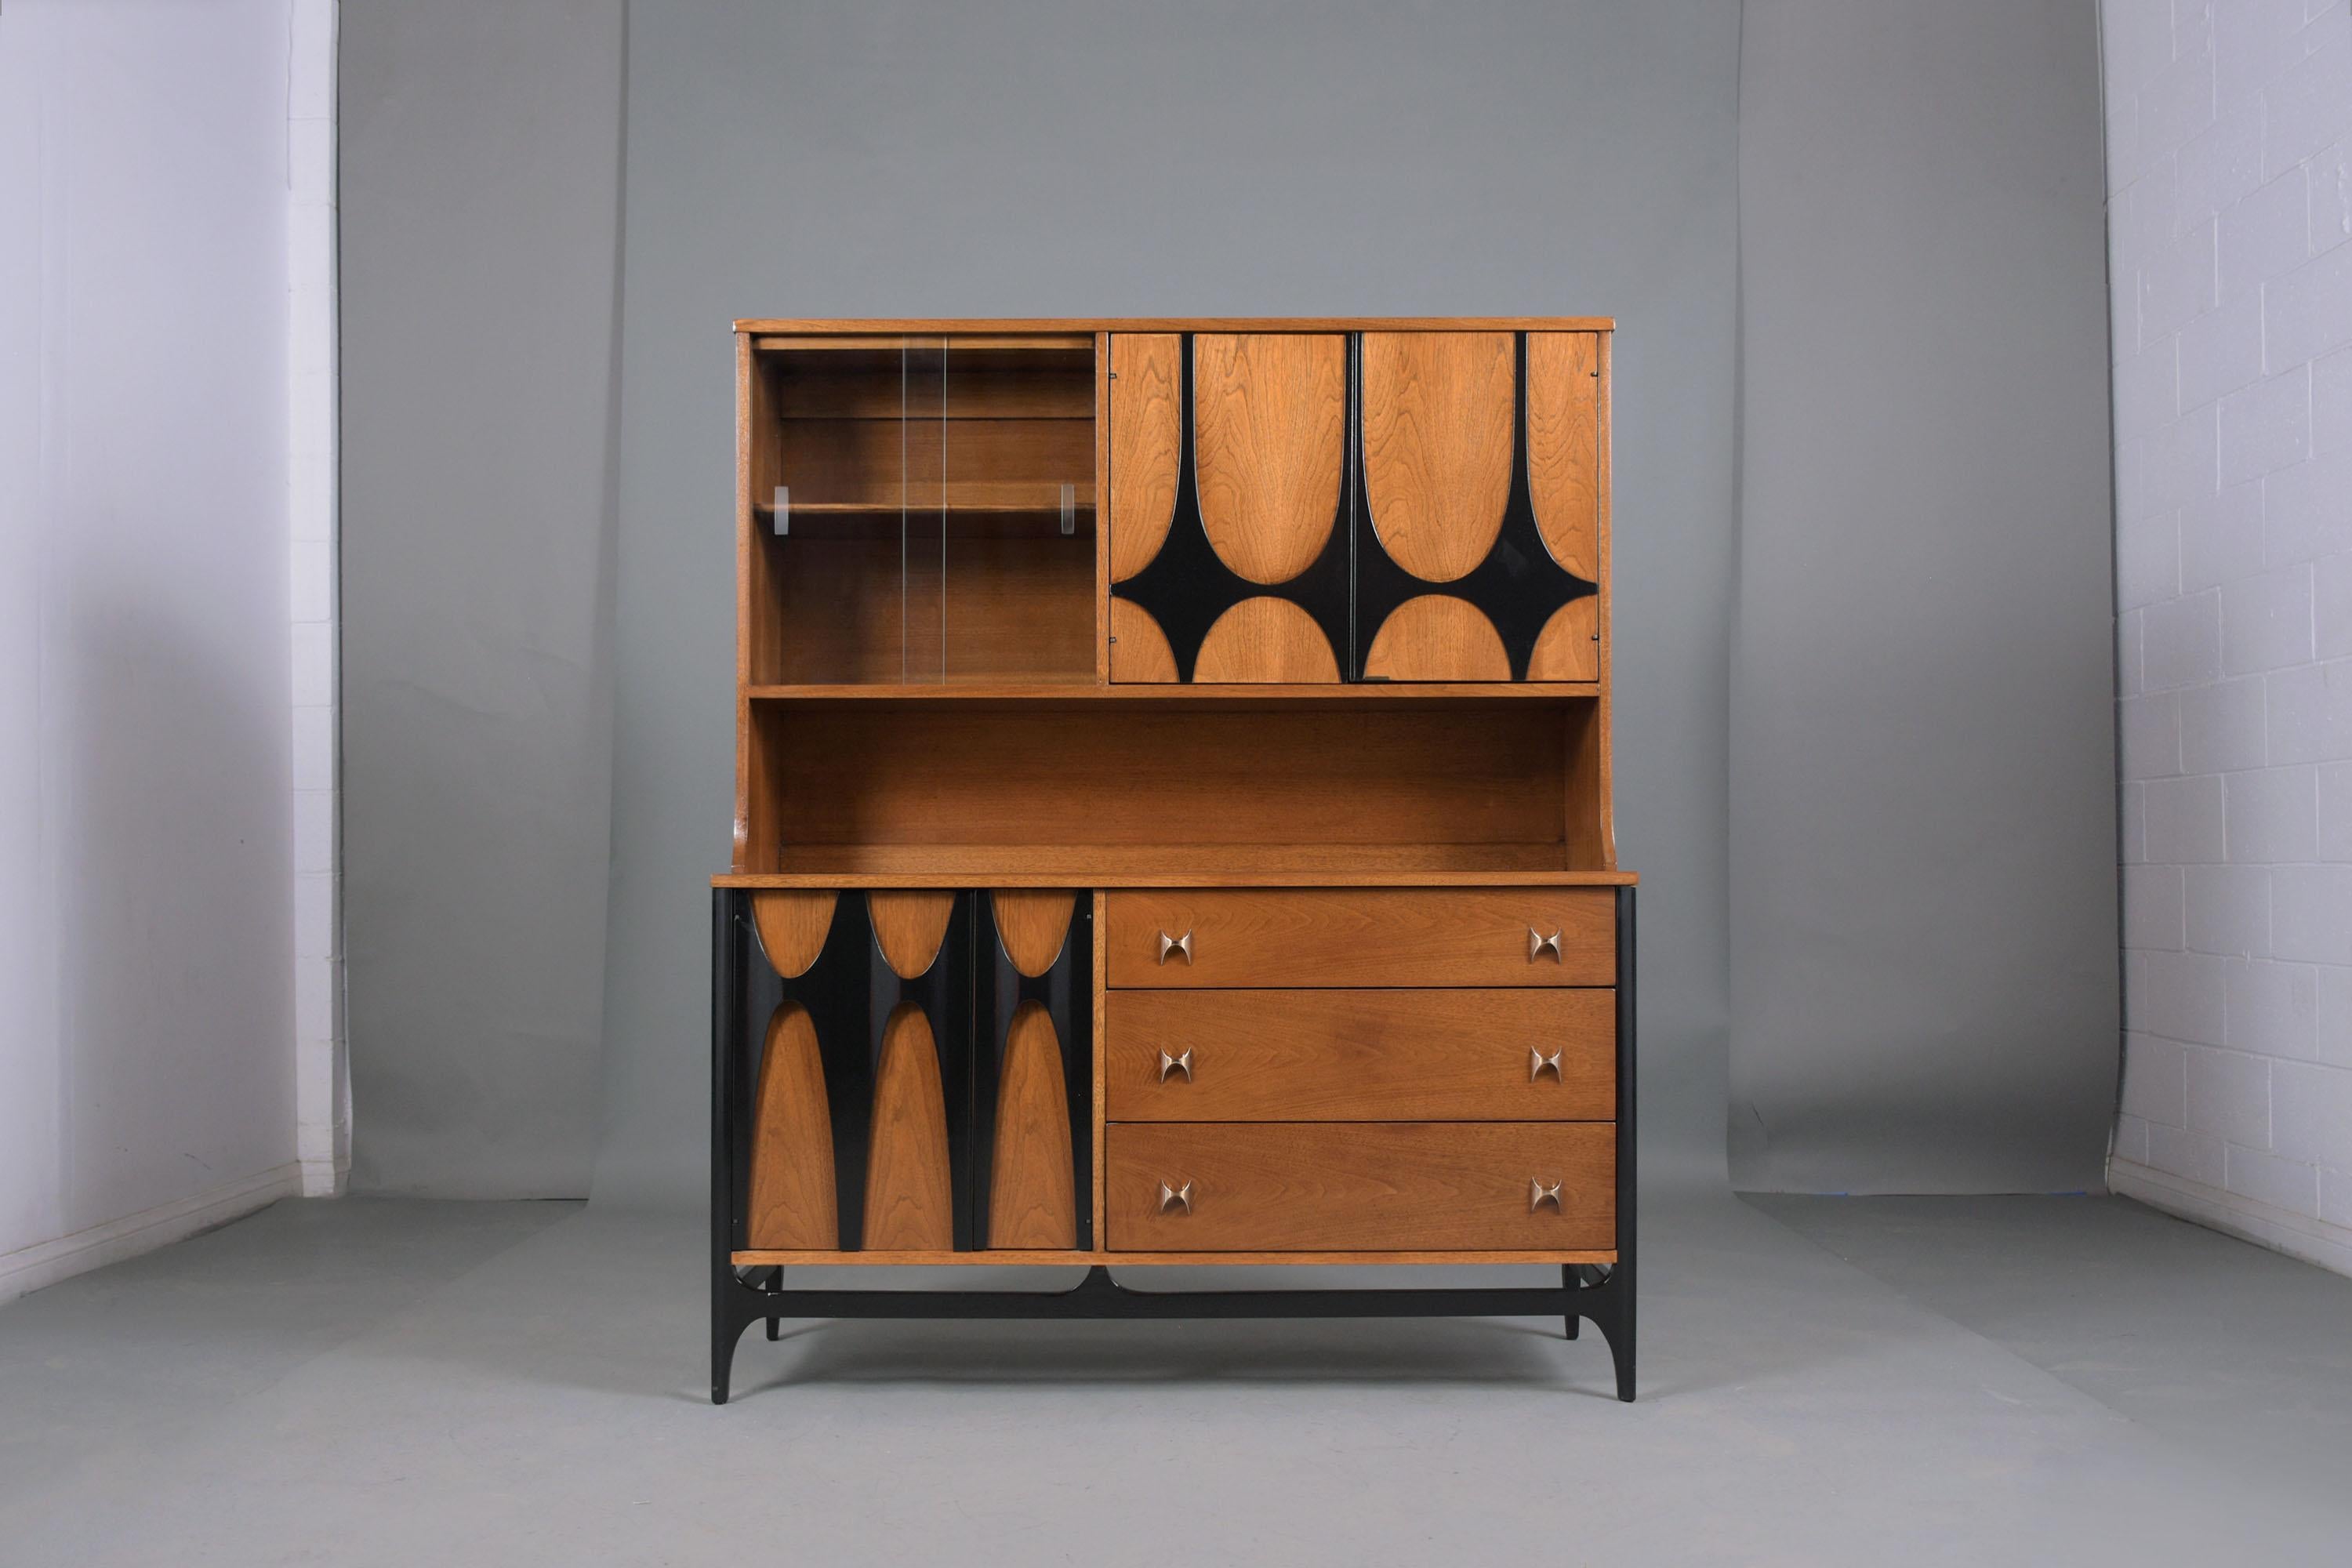 An extraordinary 1960s Broyhill Brasilia credenza/server has been professionally restored by our team of in the house craftsmen. This credenza features an intricate sculptural carved design, and an elegant walnut & ebonized color combination with a